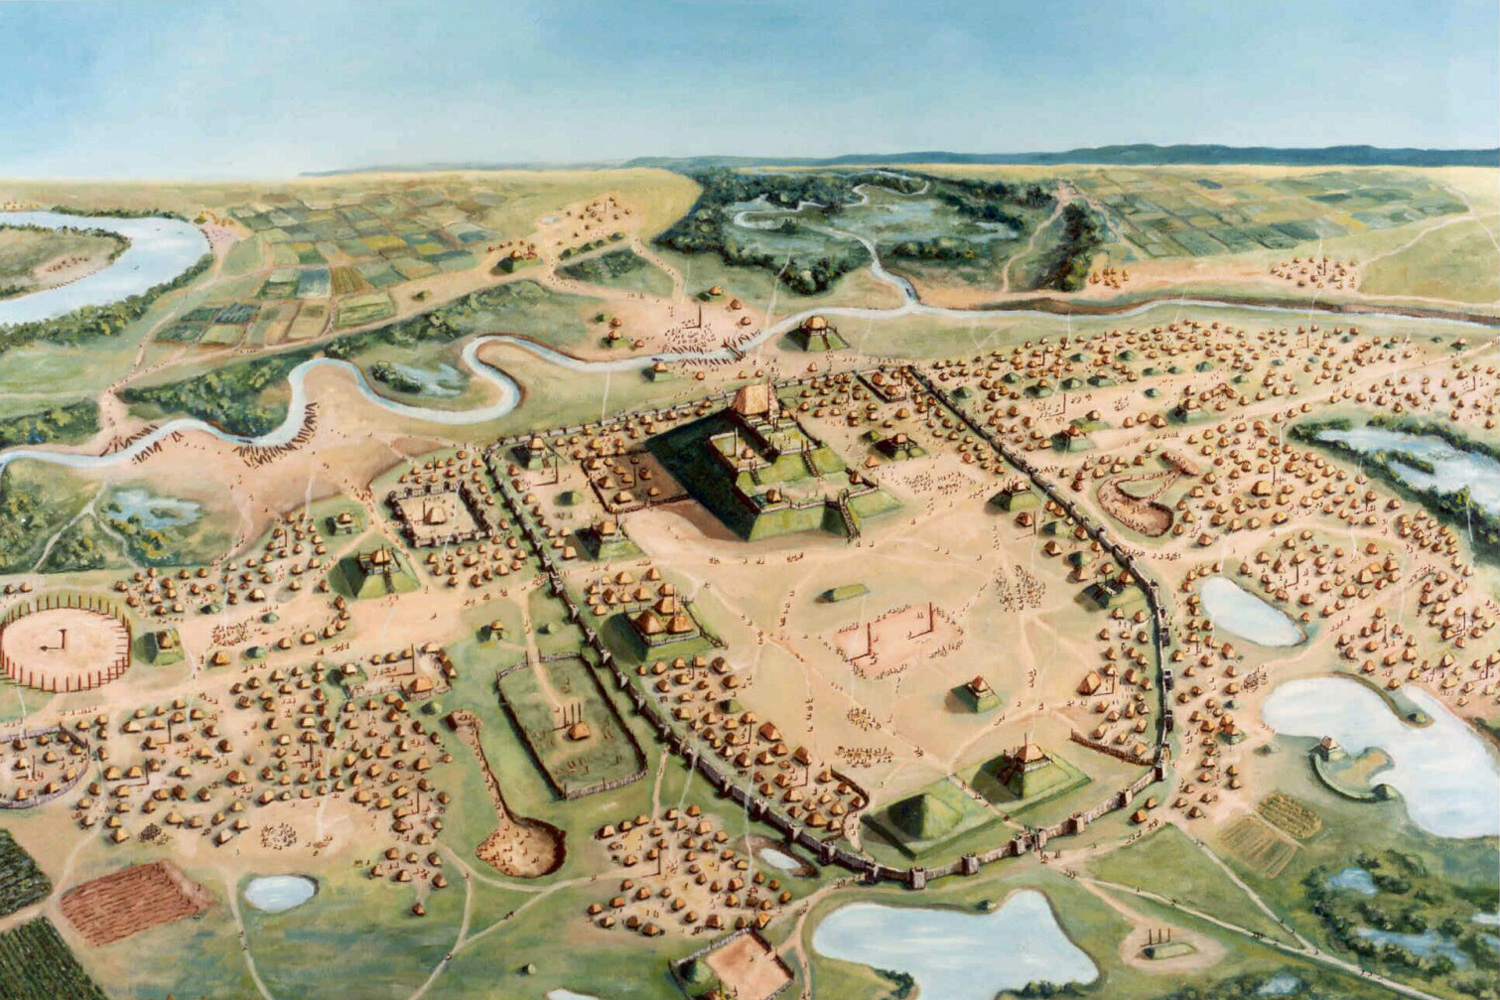 A bird's eye view of Cahokia. There are dozens of houses surrounding a wall that encloses more houses and a pyramid.